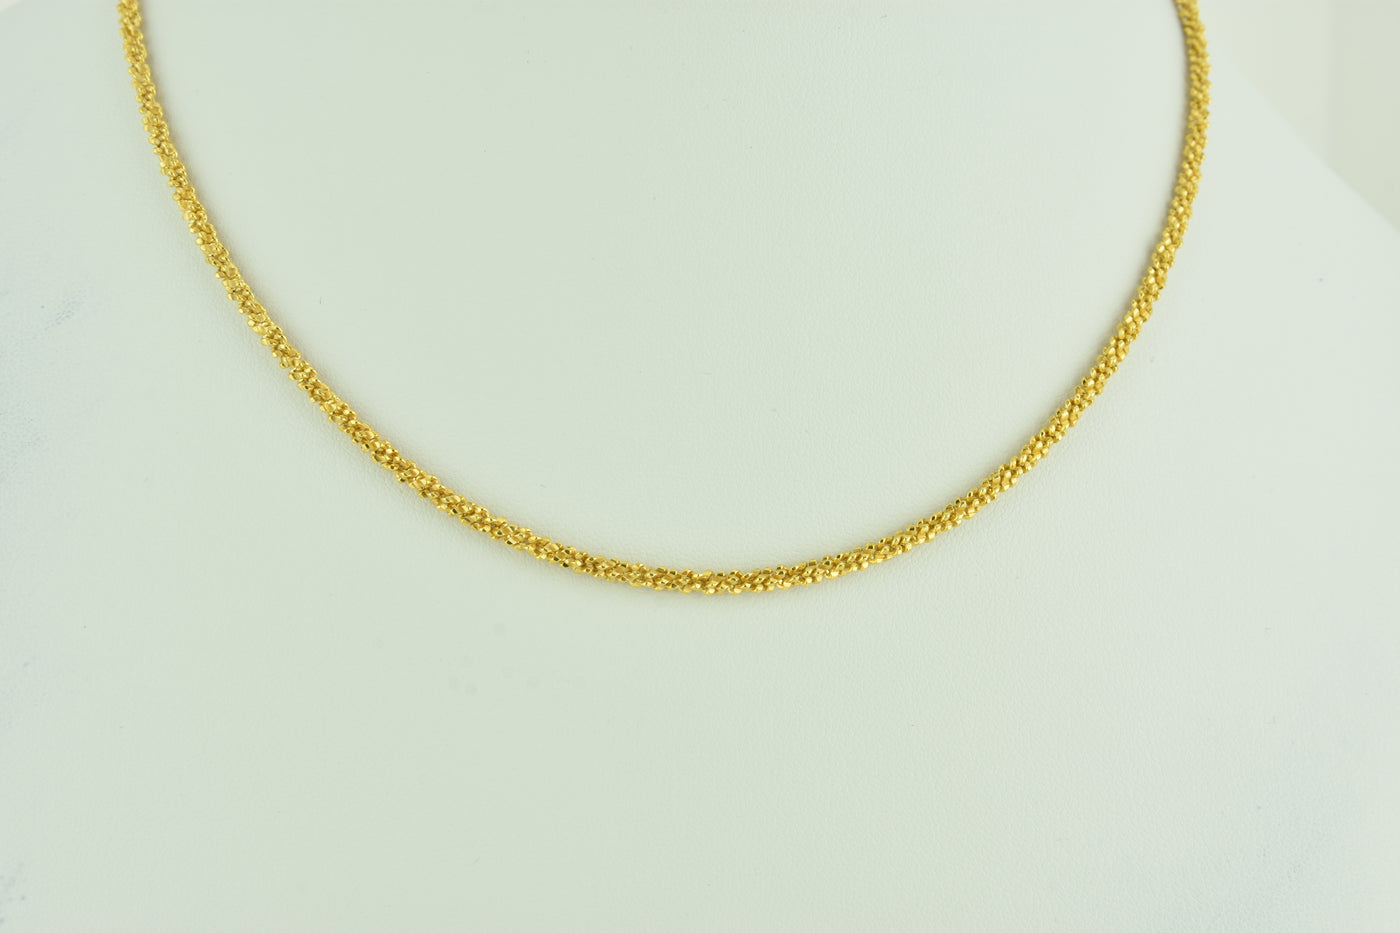 Diamond Cut Twisted Sterling Silver Chain with Yellow Gold Plate